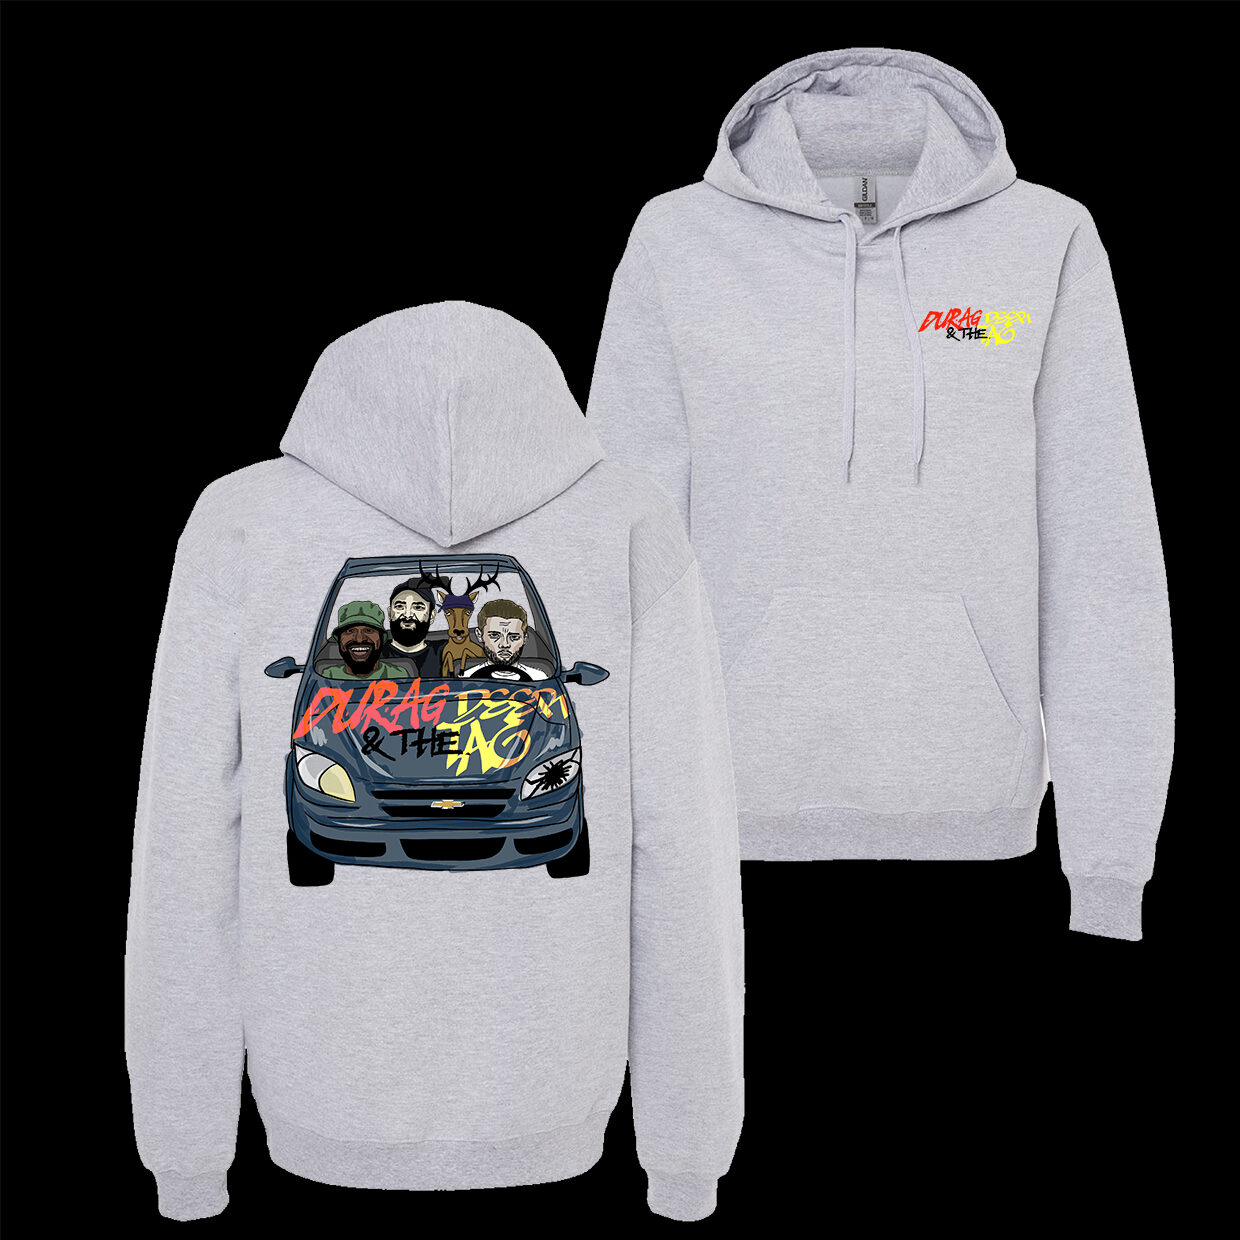 Grey Hoodie from the Durag and the Deer tag Podcast with the Hooptie design